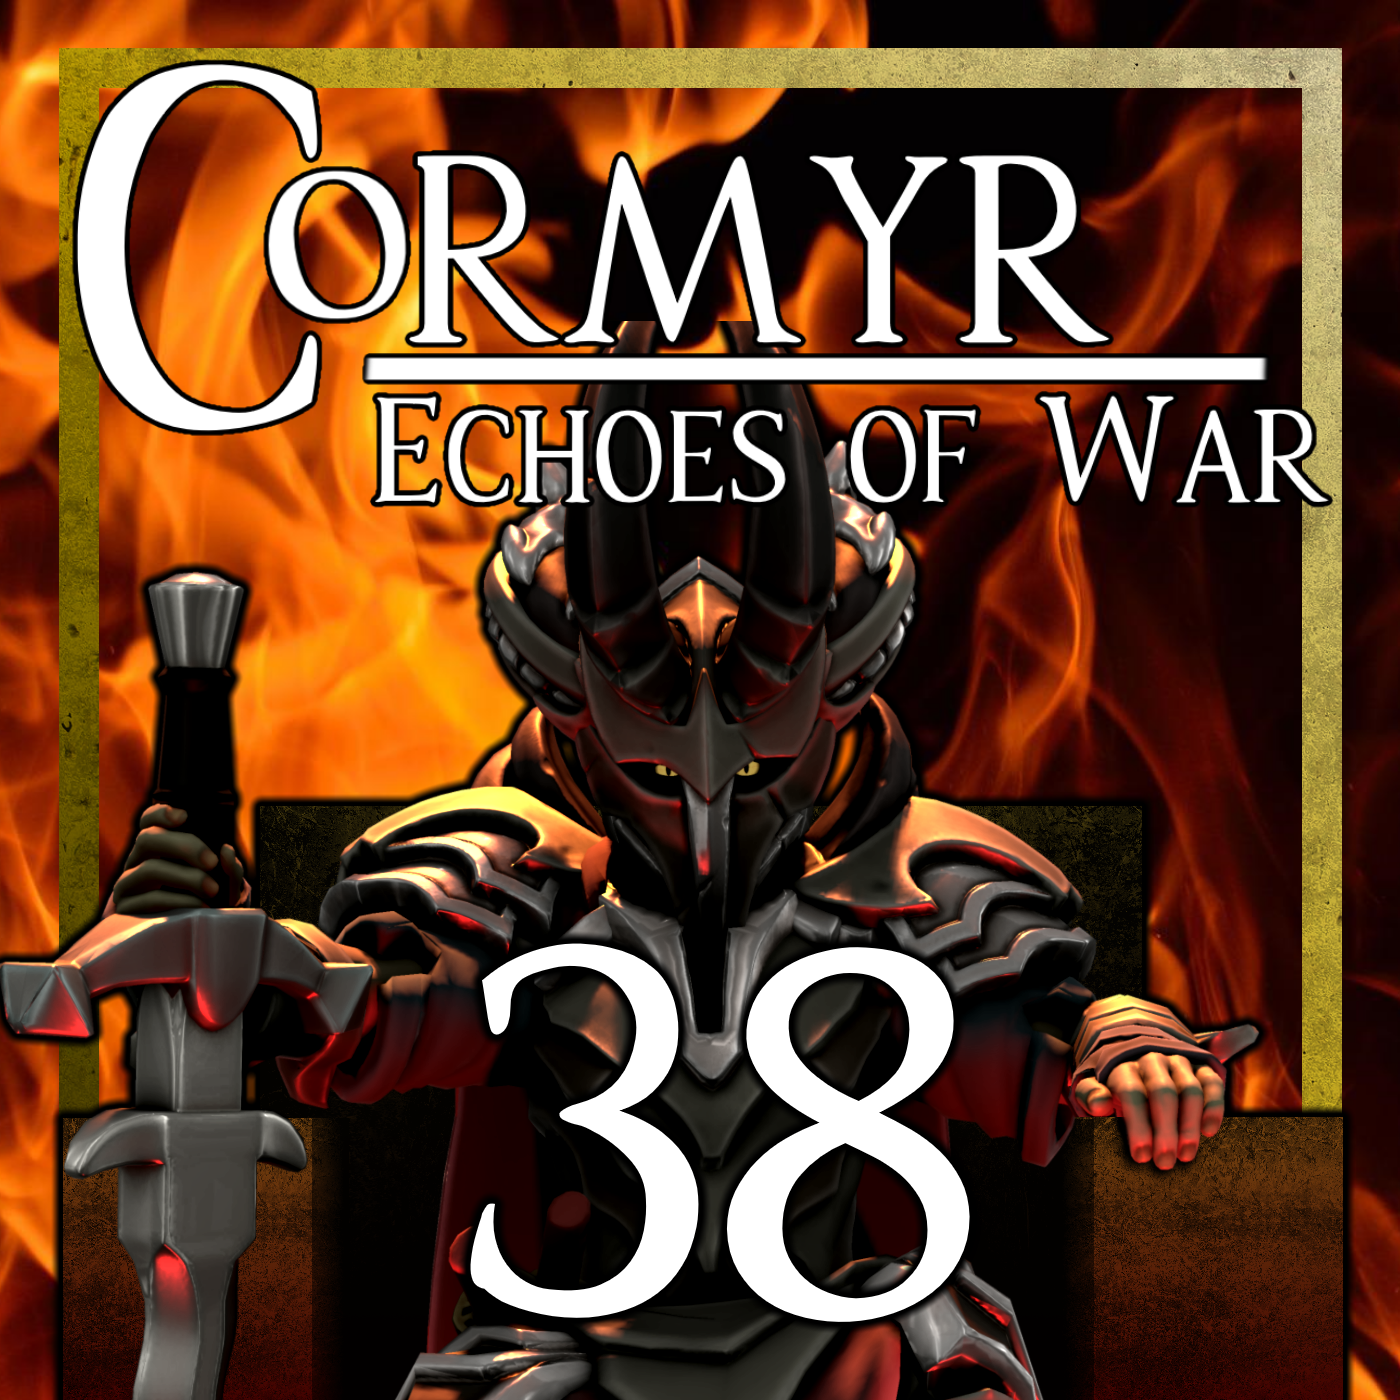 Cormyr: Echoes of War - Ep. 38 - Hunting the Hunter